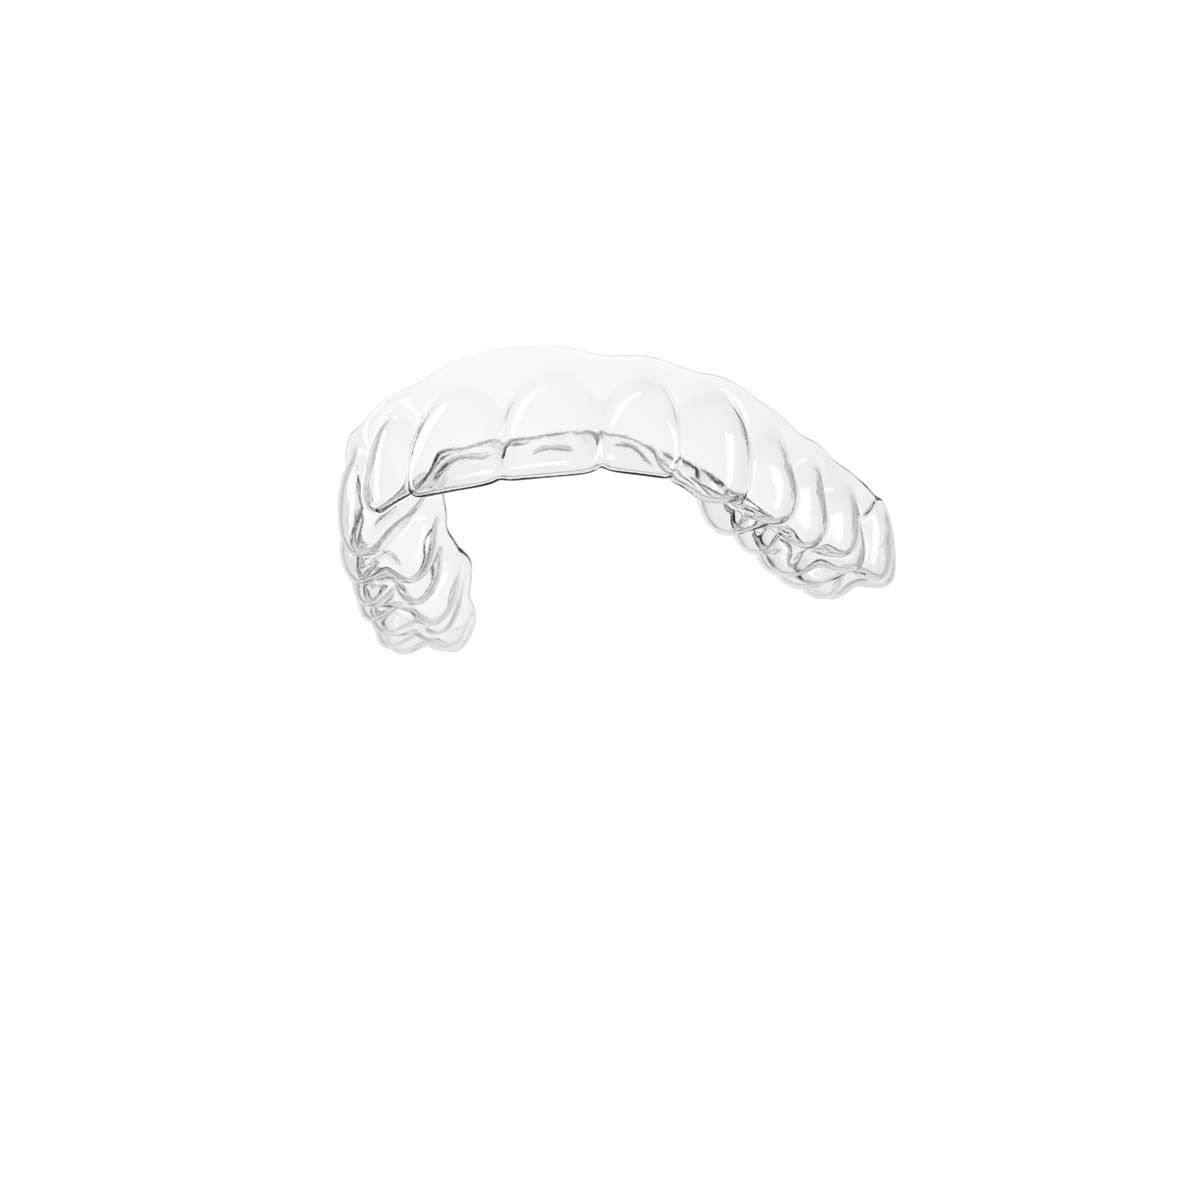 Improved materials and predictability:  Dentsply Sirona’s SureSmile® Aligner solution includes expert support tailored to a specific practice’s goals.